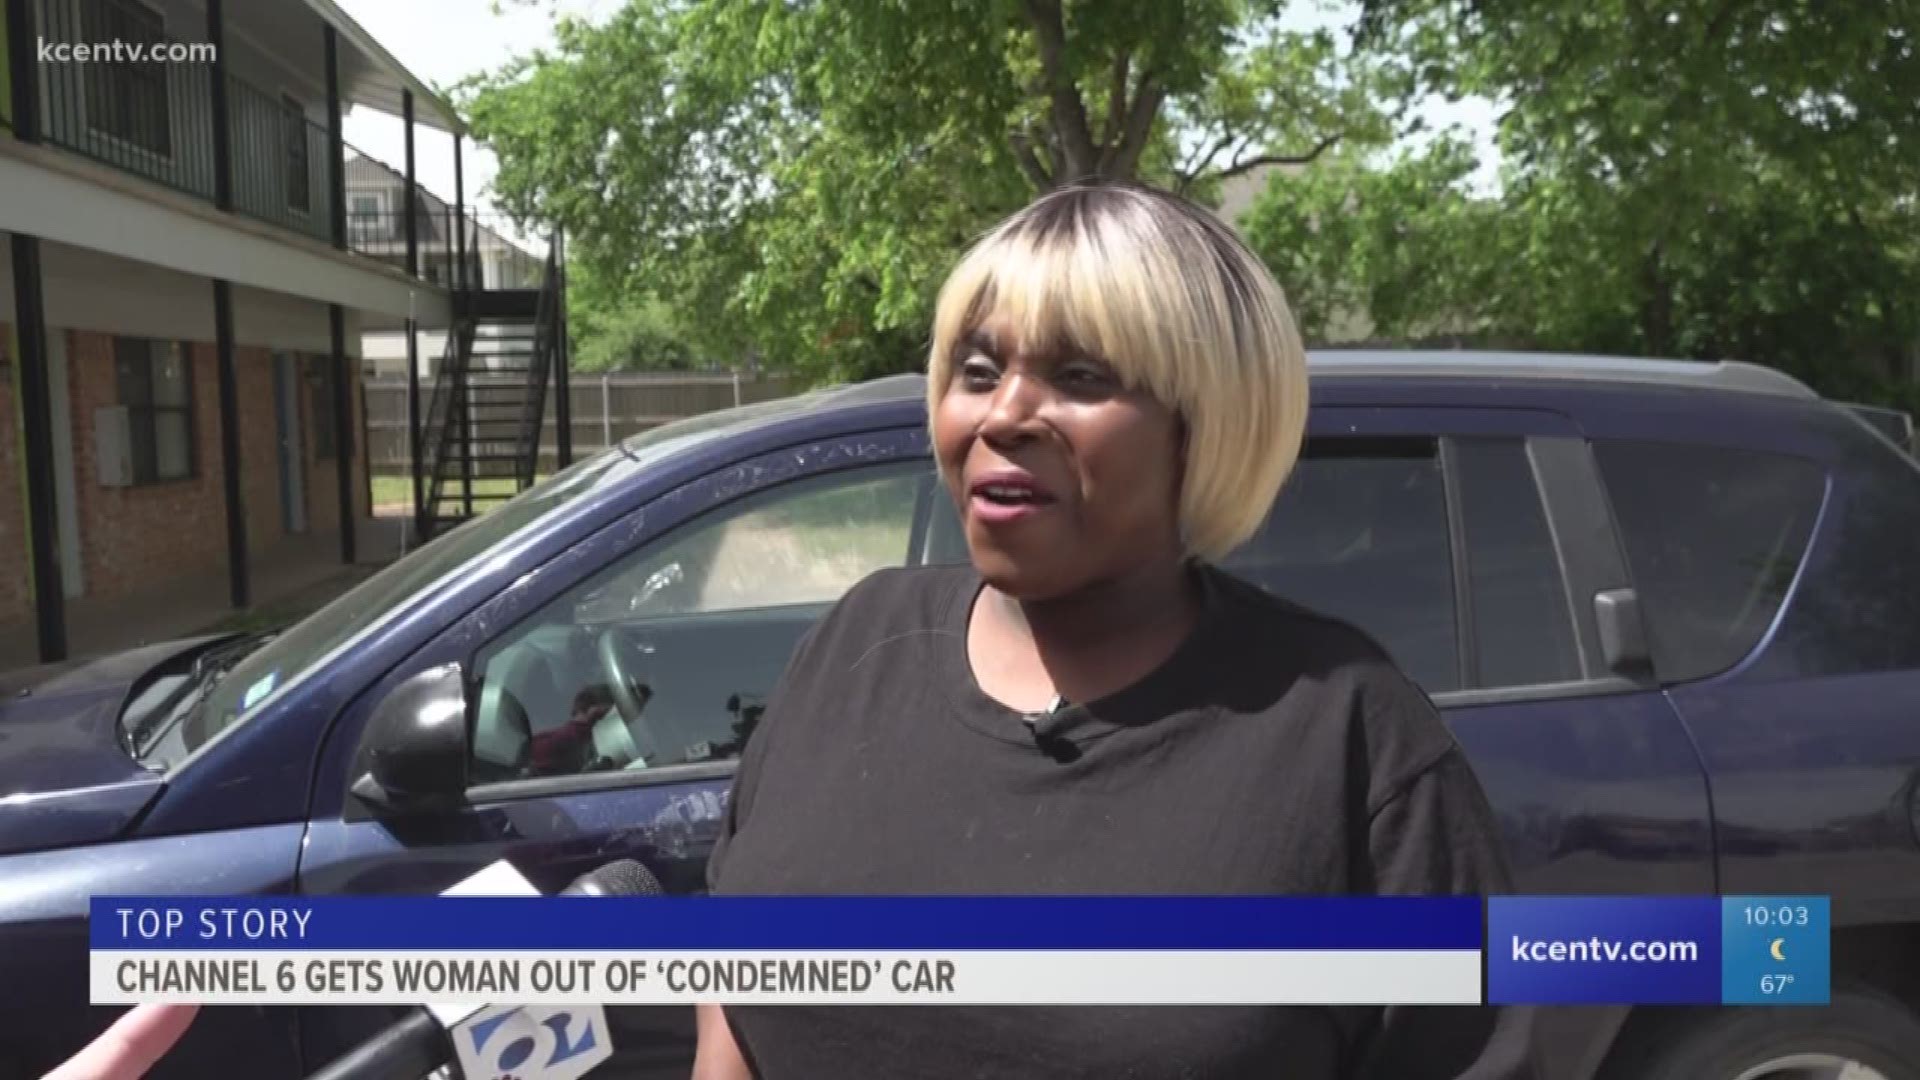 After finding out from a mechanic the car had previously been "condemned" KCEN Channel 6 investigative reporter Andrew Moore helped the woman get her refund.